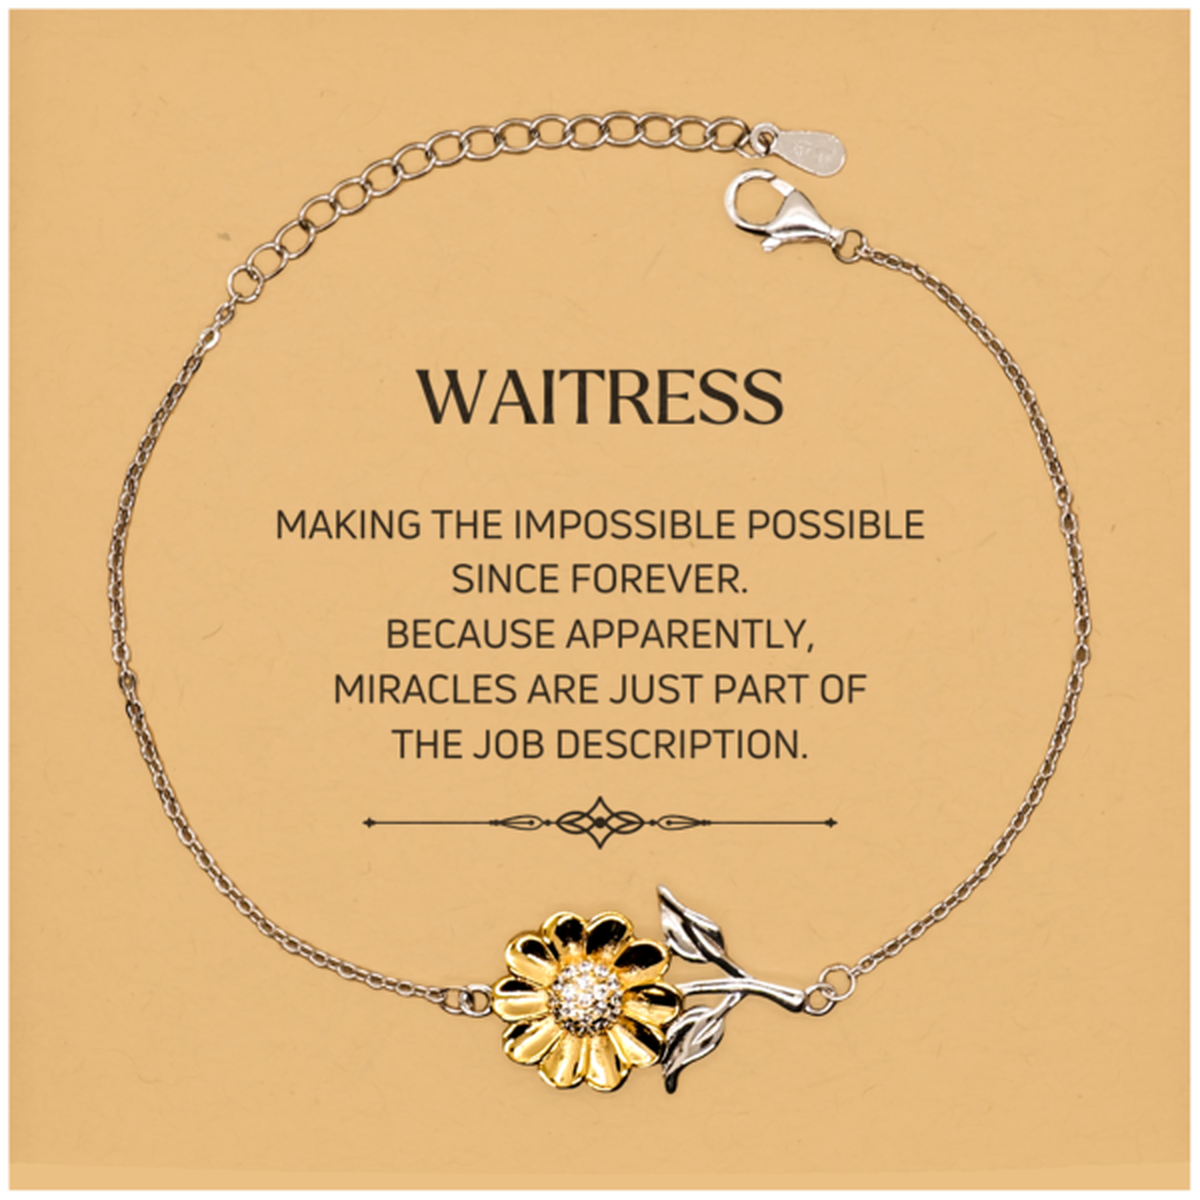 Funny Waitress Gifts, Miracles are just part of the job description, Inspirational Birthday Christmas Sunflower Bracelet For Waitress, Men, Women, Coworkers, Friends, Boss